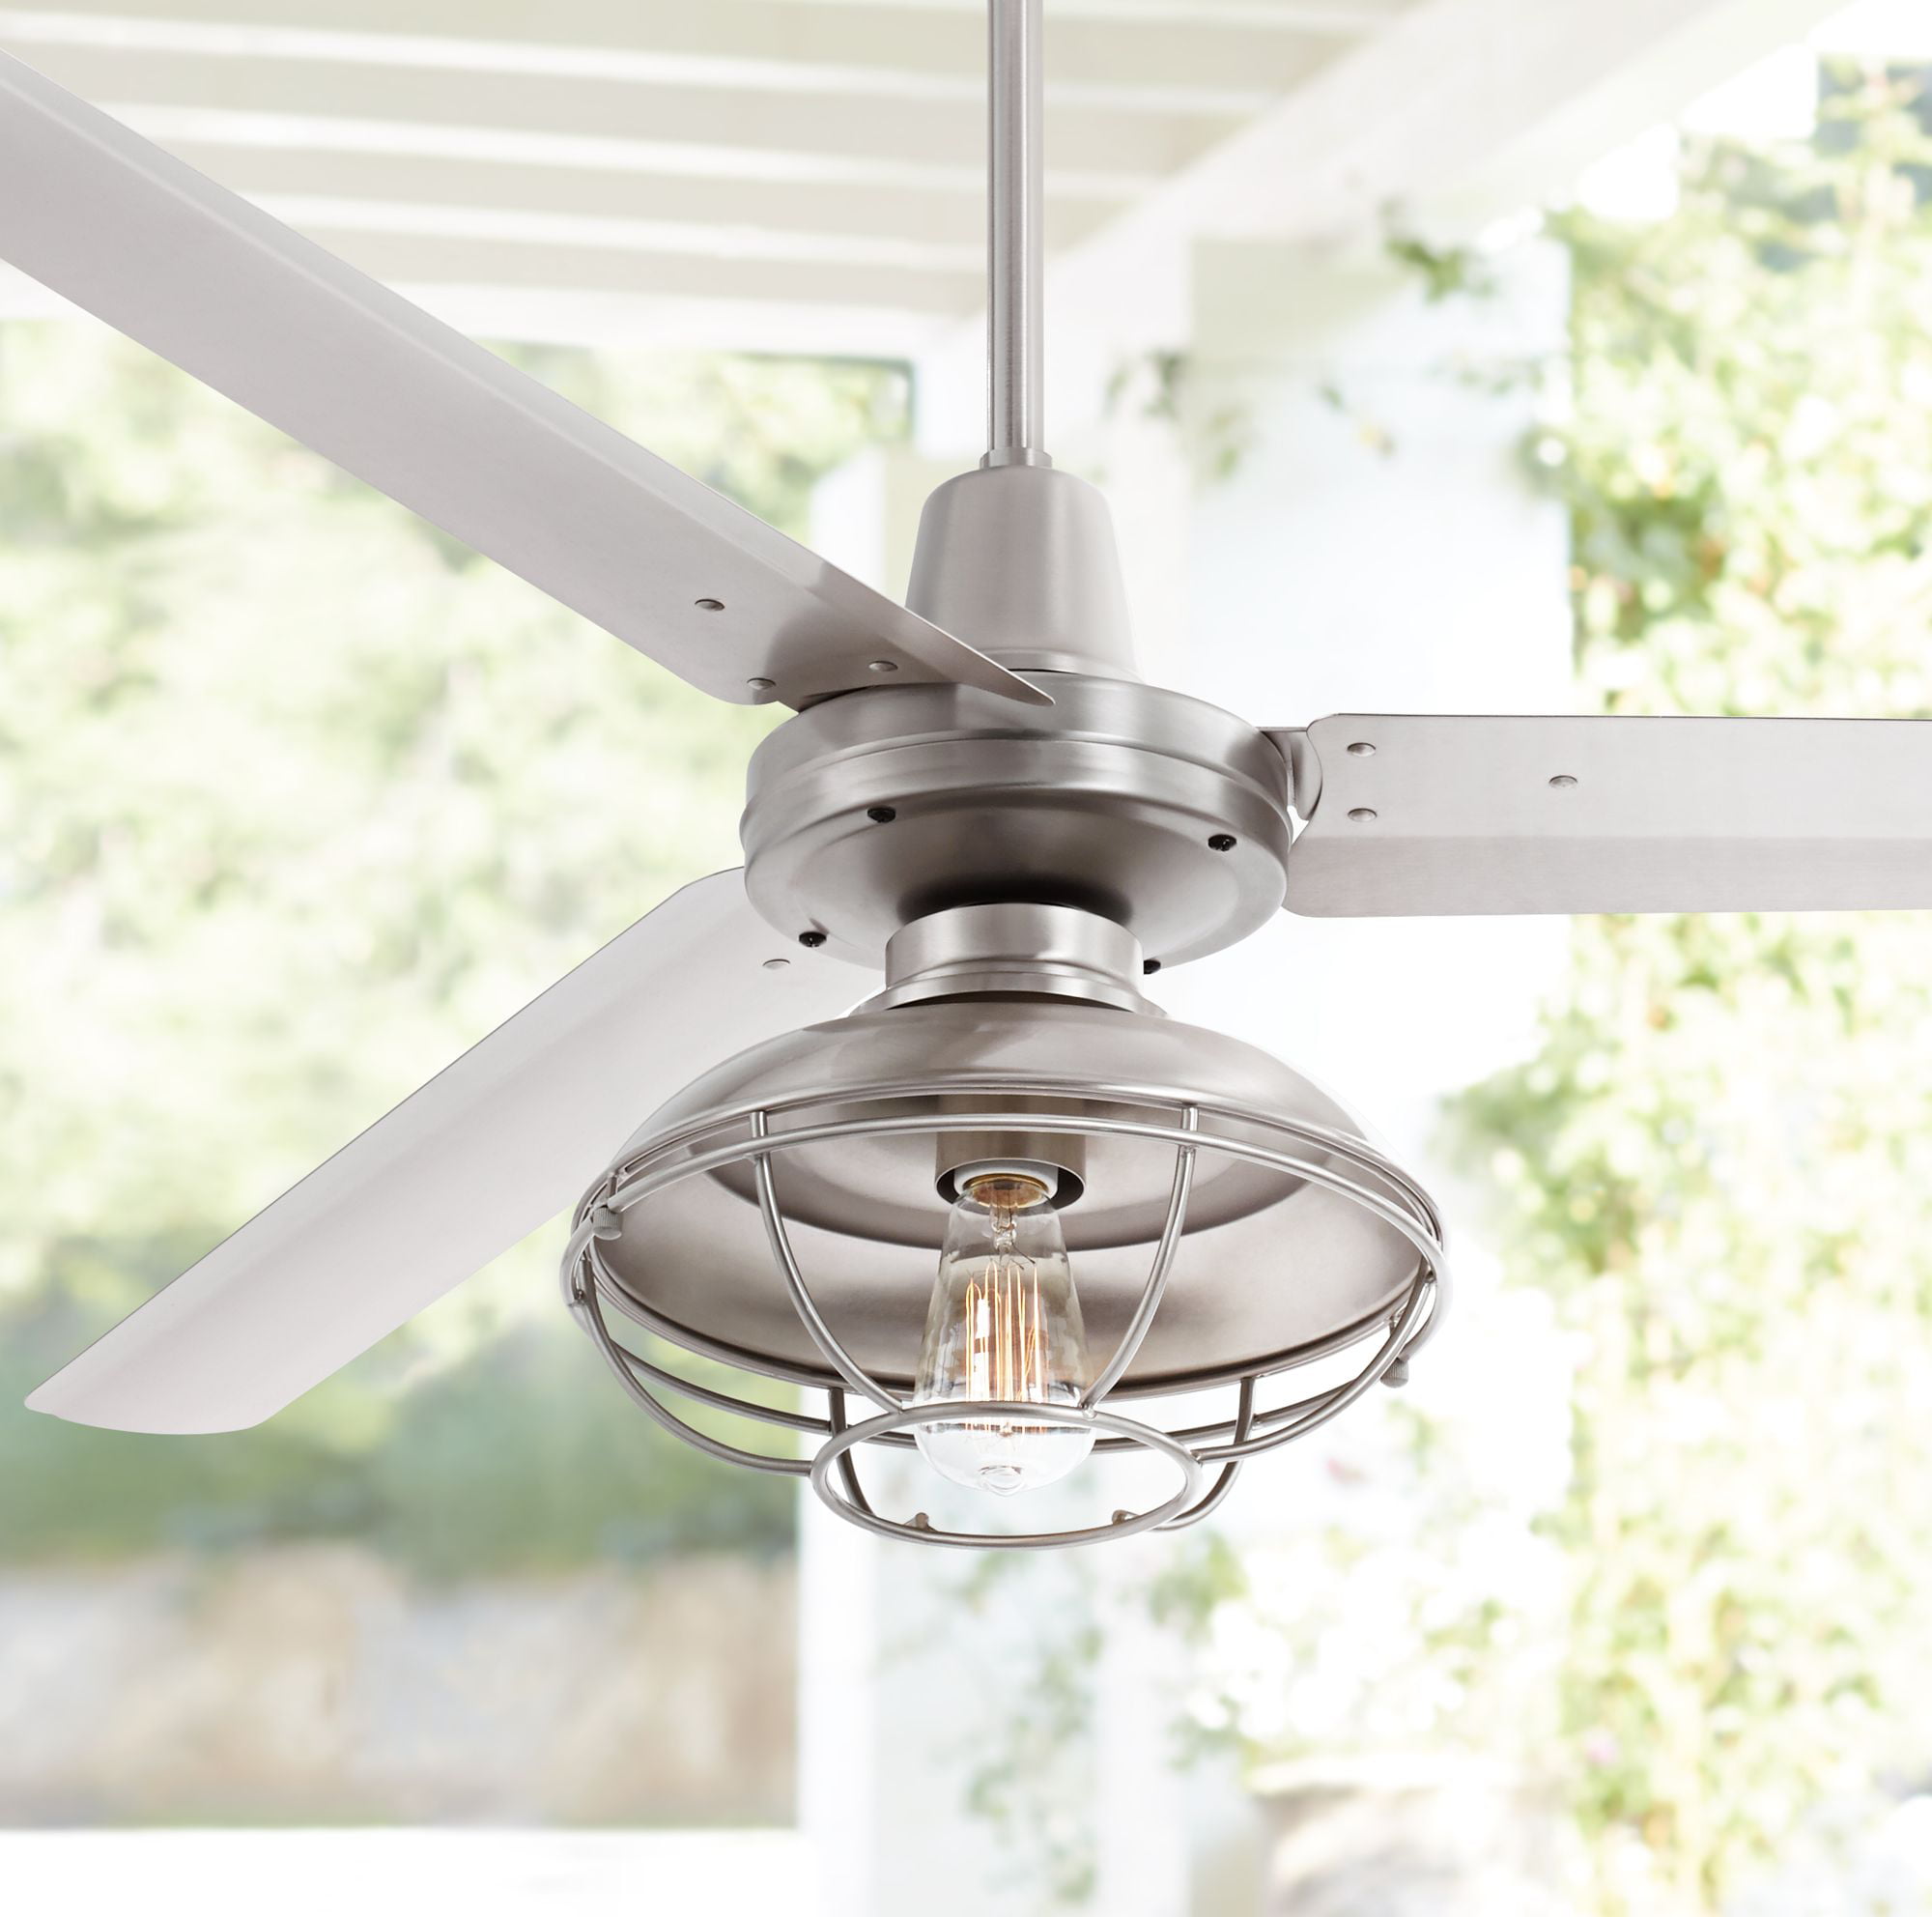 60" Casa Vieja Industrial Outdoor Ceiling Fan with Light ...